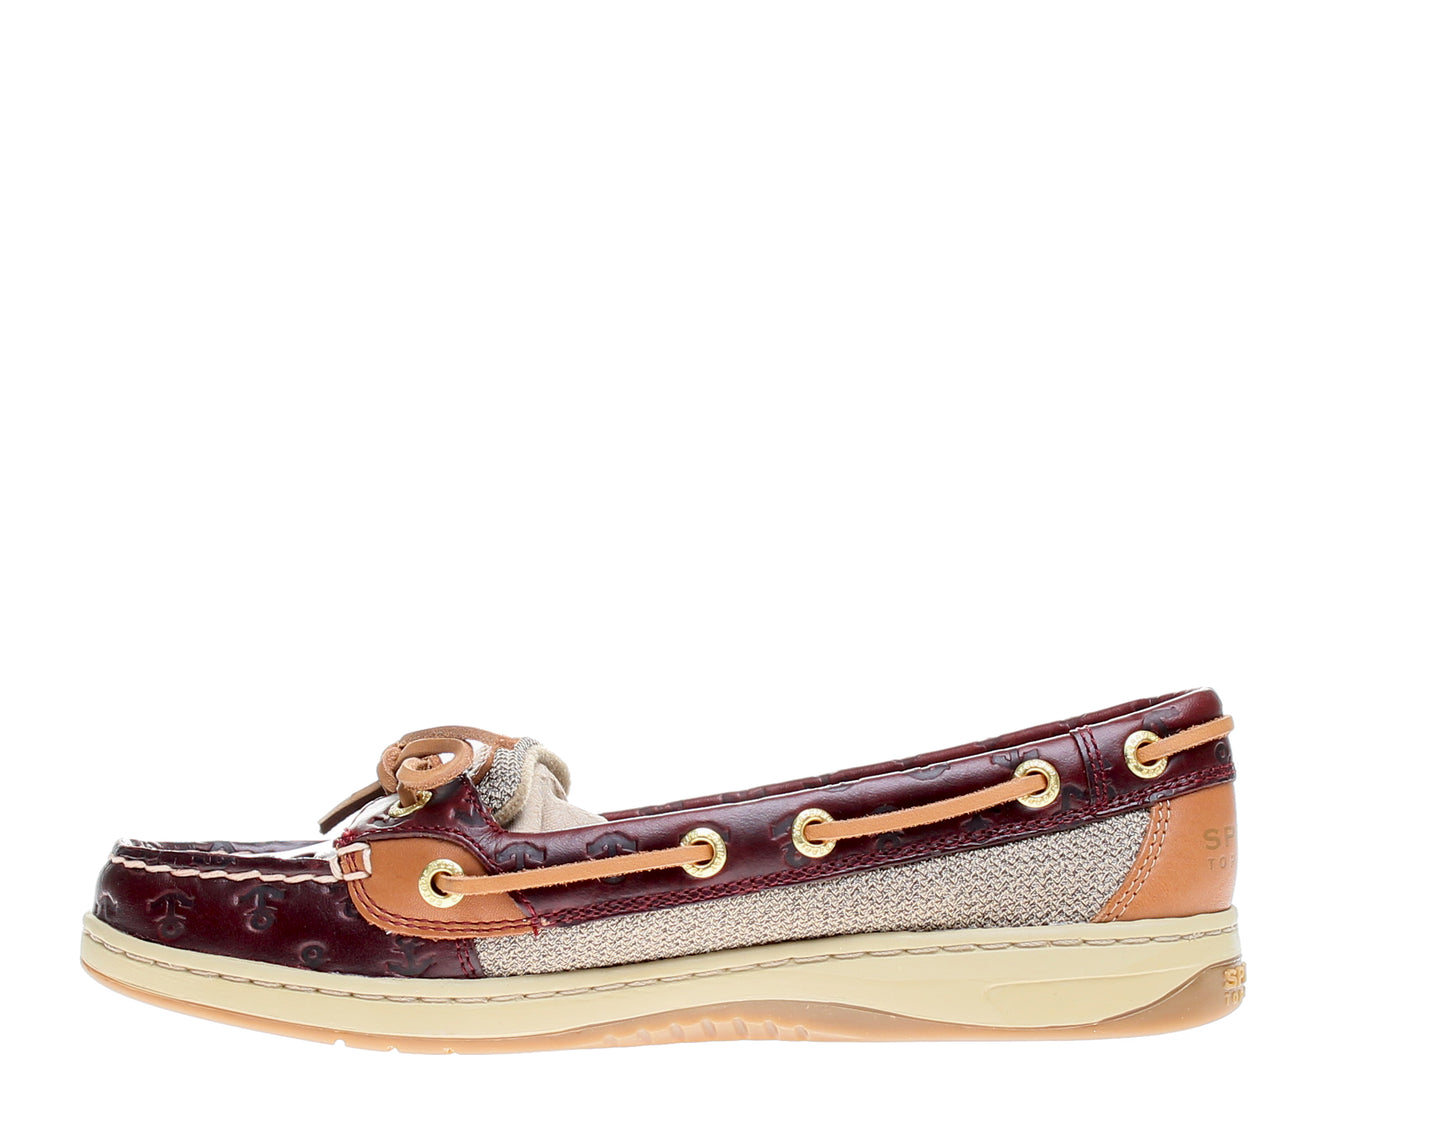 Sperry Top Sider Angelish Women's Slip On Boat Shoes